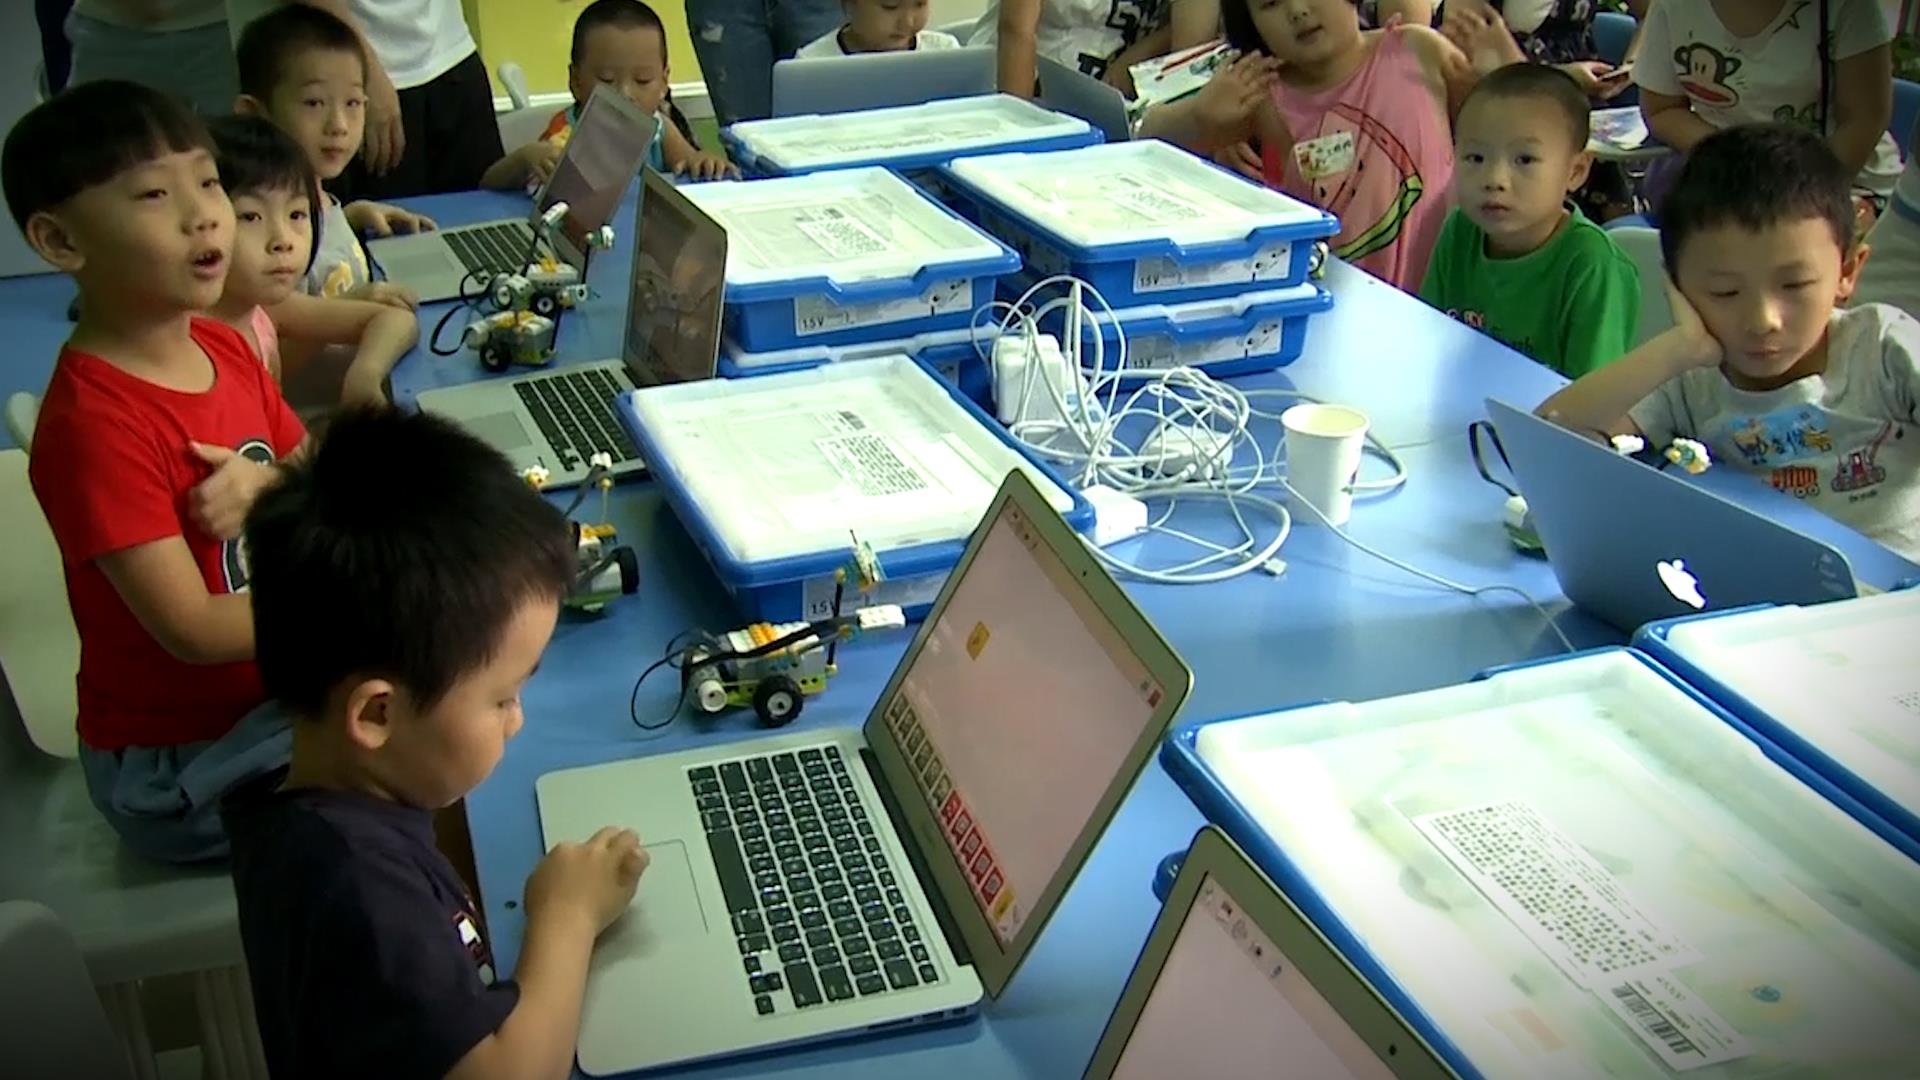 China bans children under 16 from streaming and becoming stars|Photo: www.nbcnews.com